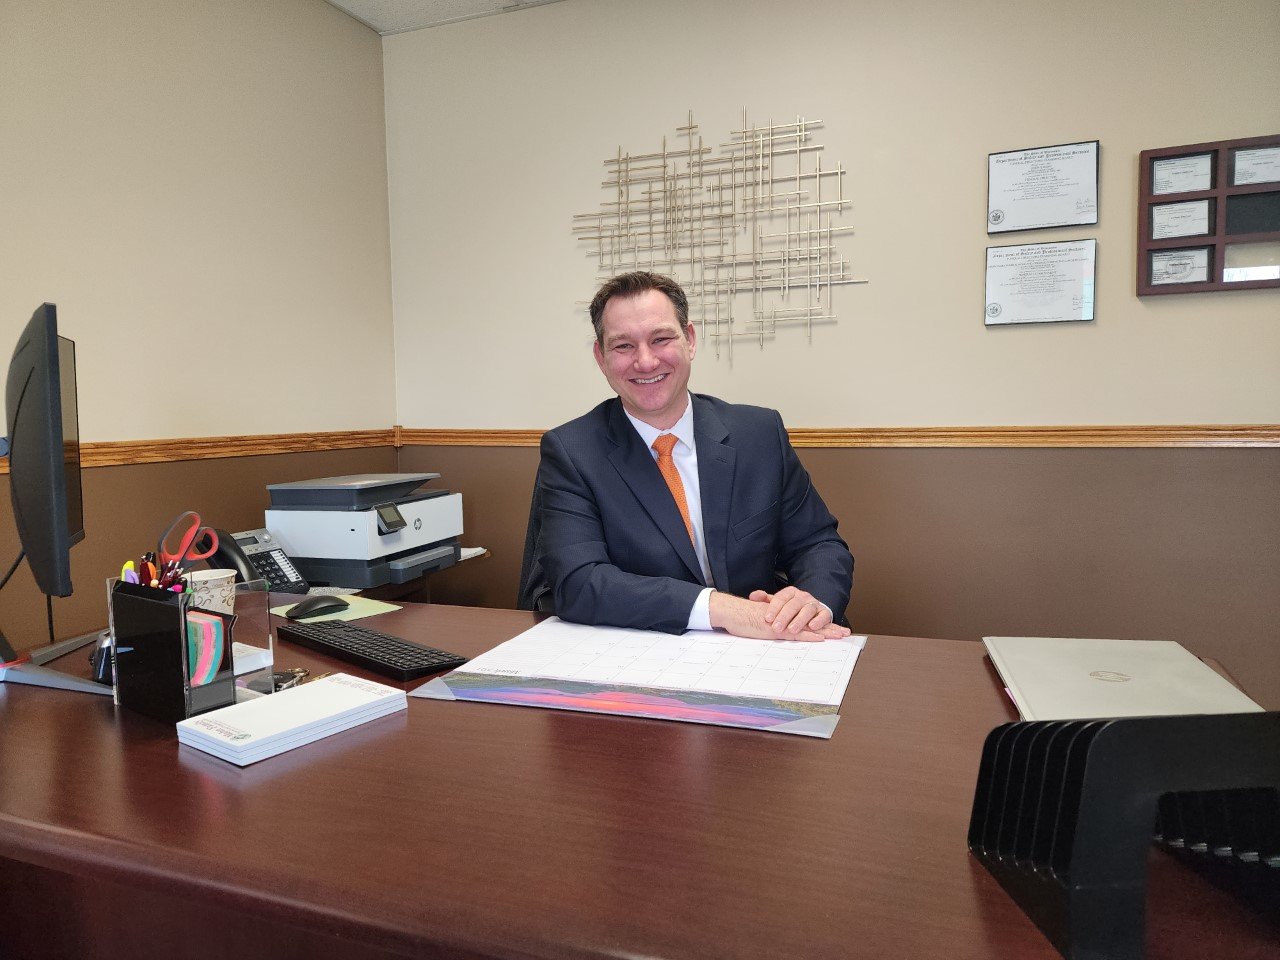 Joe Mahn of Mahn Family Funeral & Cremation Services sits in the business’s planning office at 344 W. Main St. in Ellsworth. A new chapel will be built in Crossing Meadows Business Park.